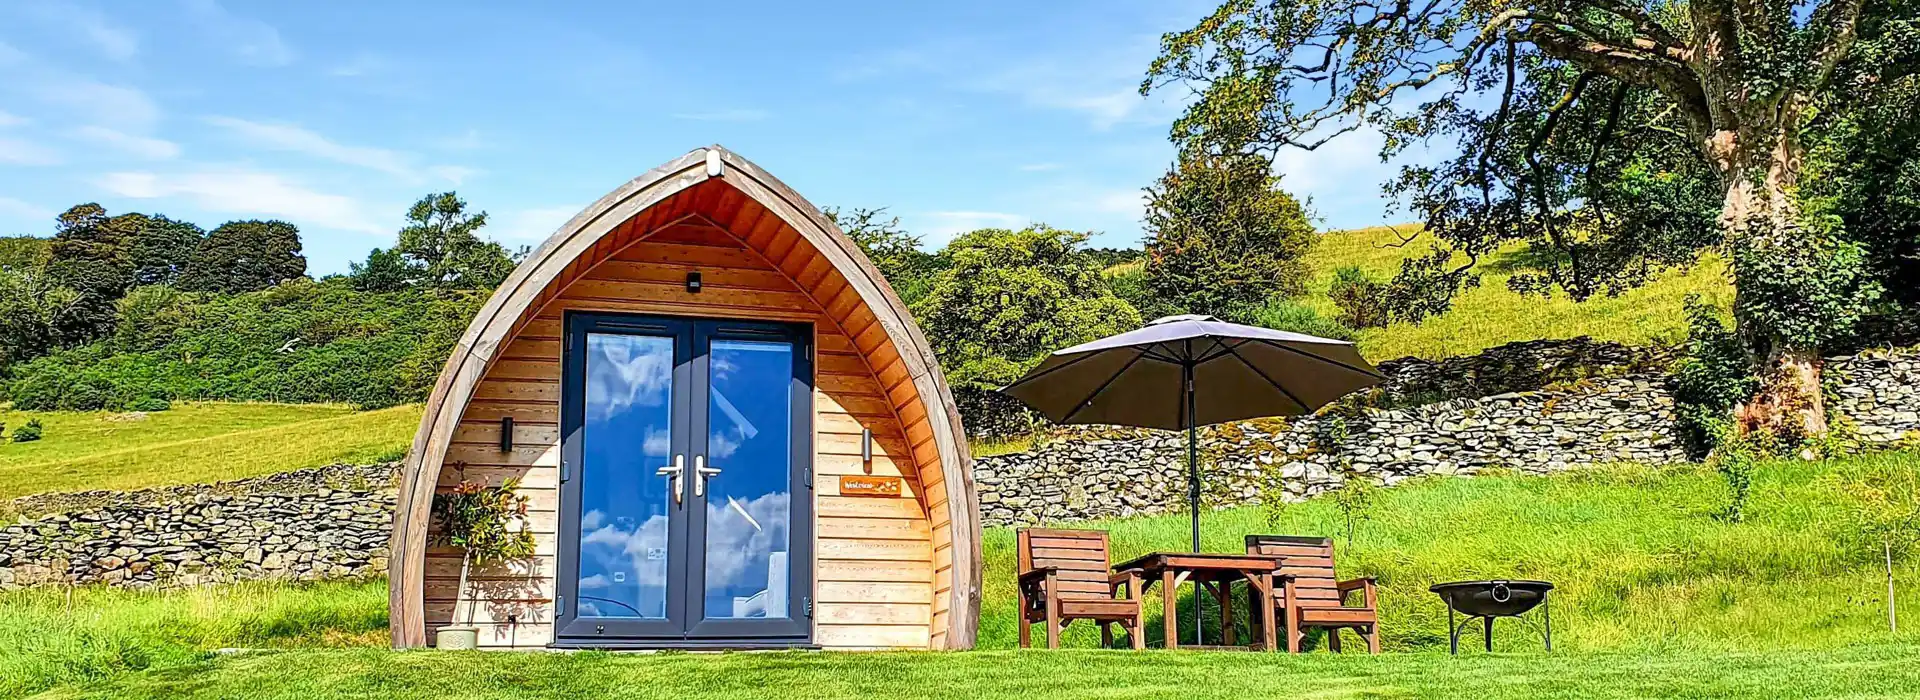 Kendal camping and glamping pods